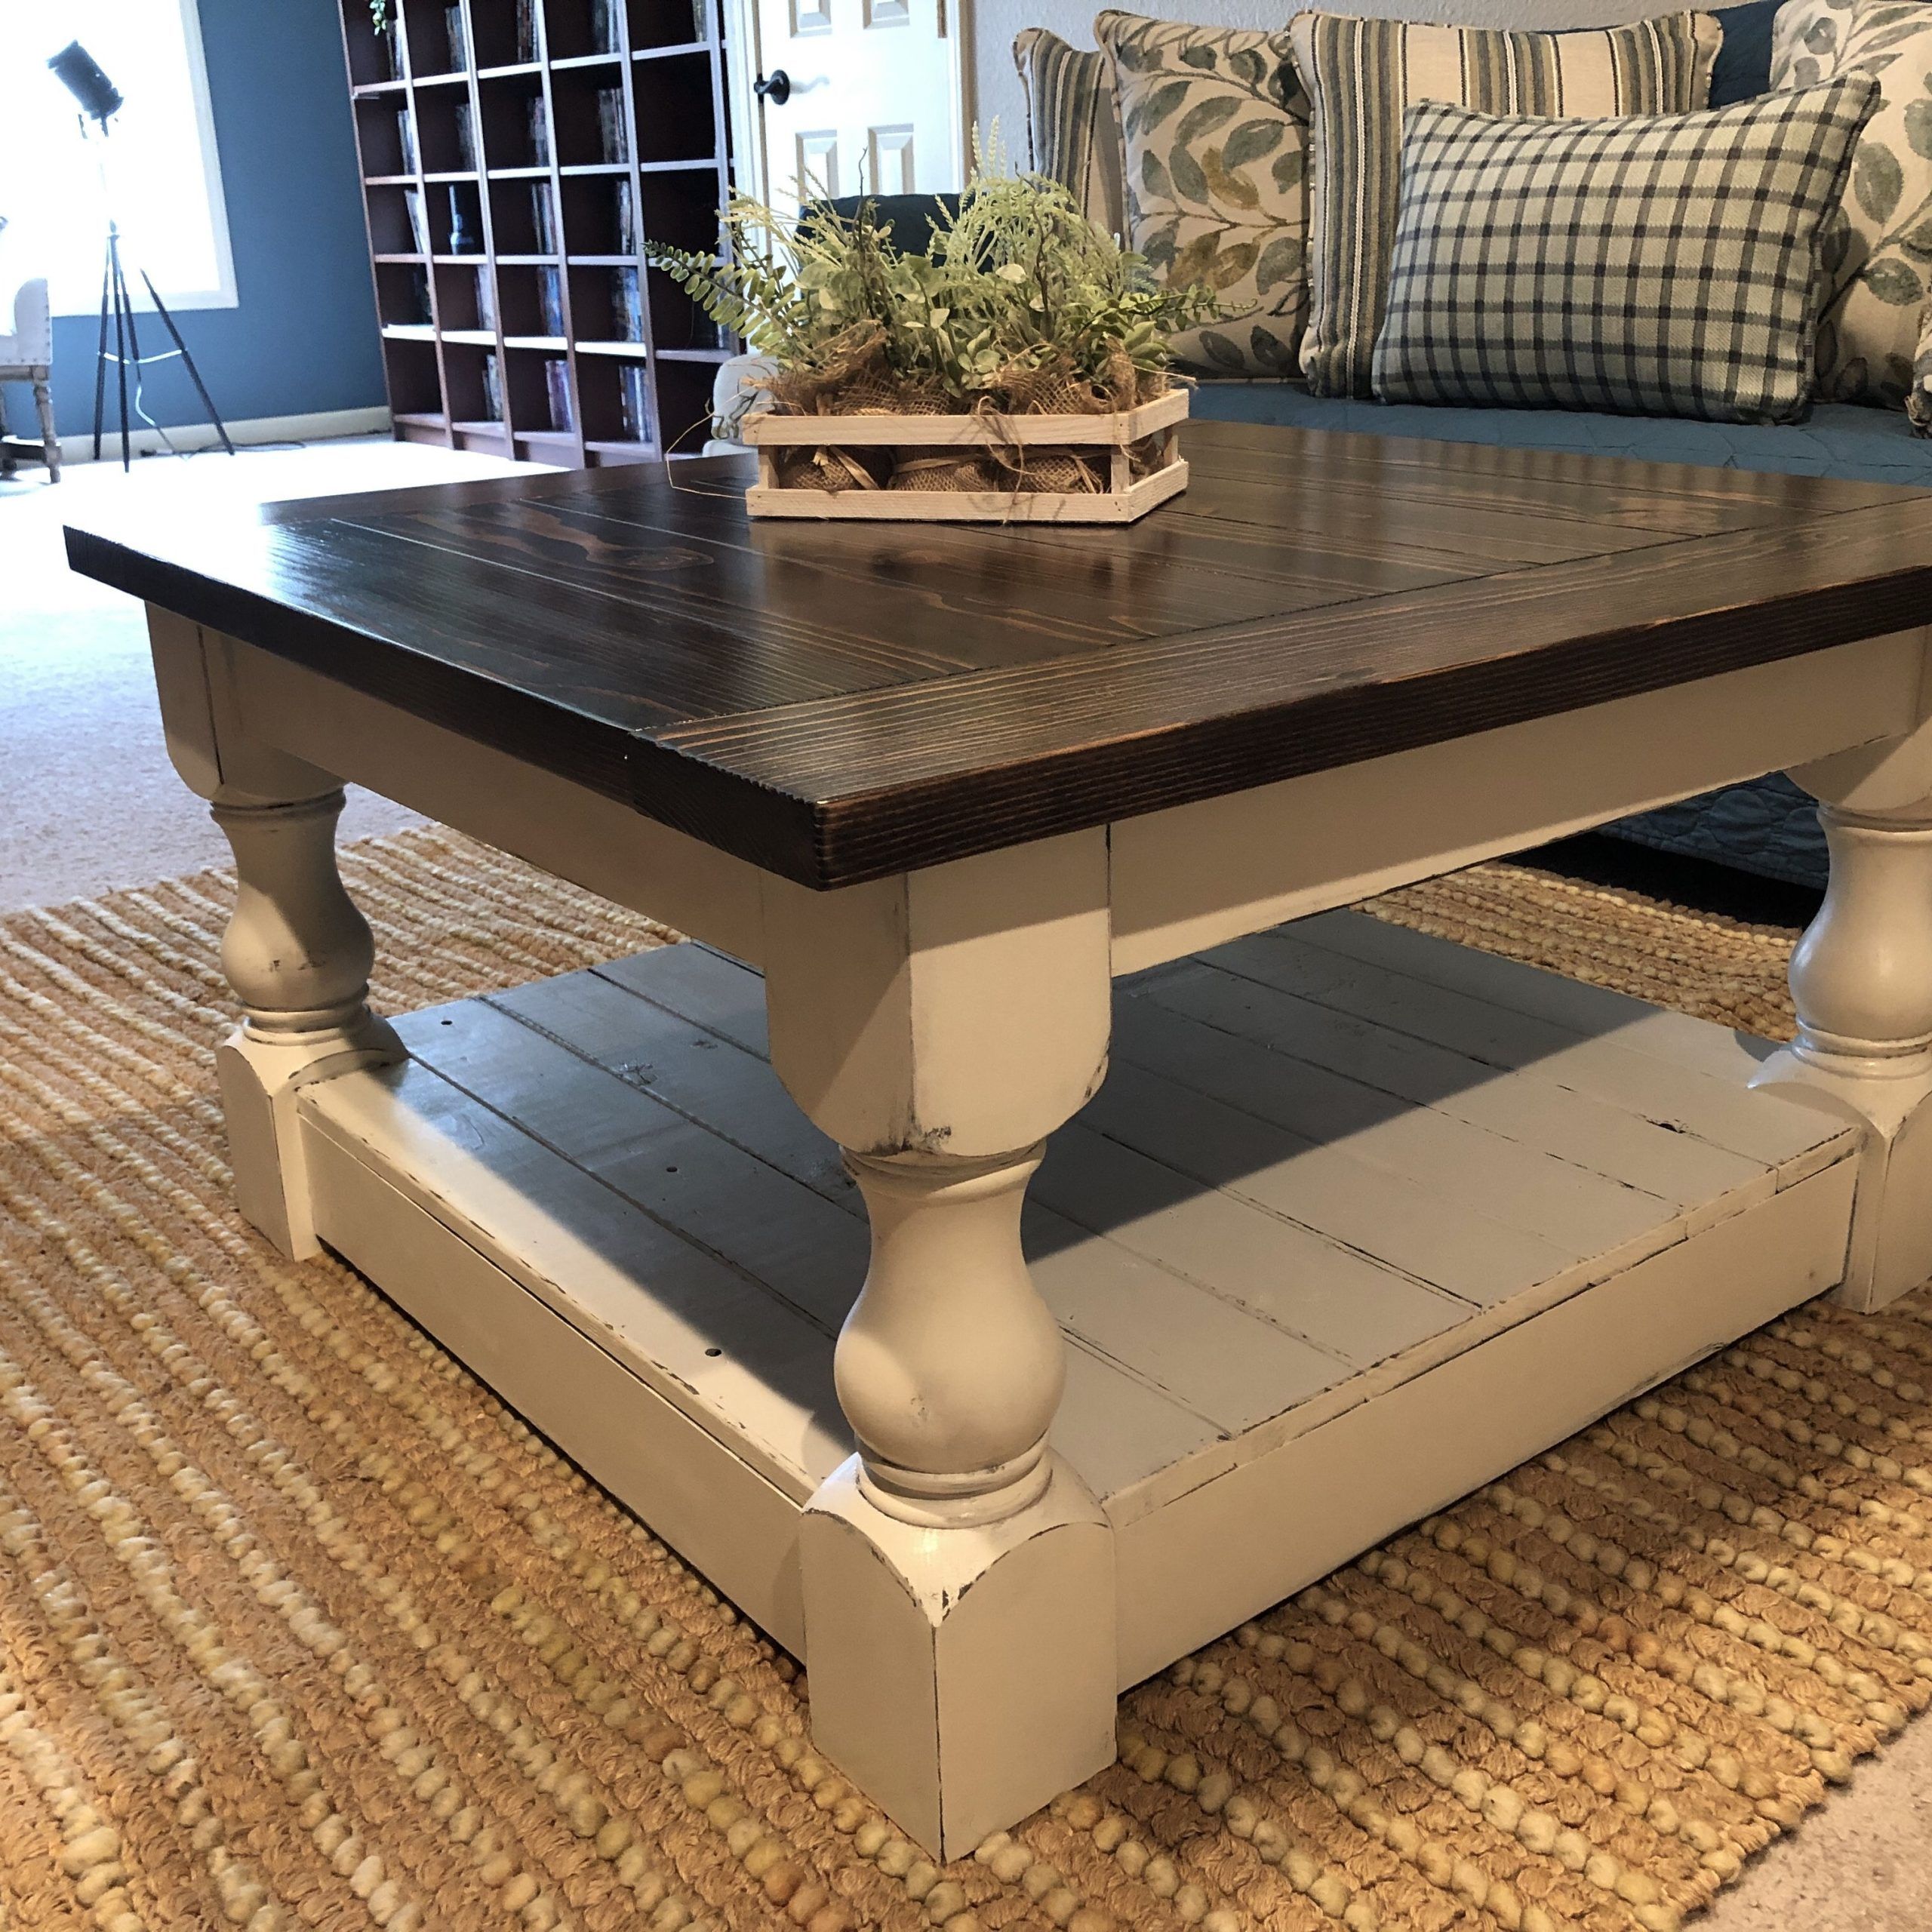 A Perfect Addition To Your Home: The Farmhouse Rustic Coffee Table Regarding Living Room Farmhouse Coffee Tables (View 9 of 20)